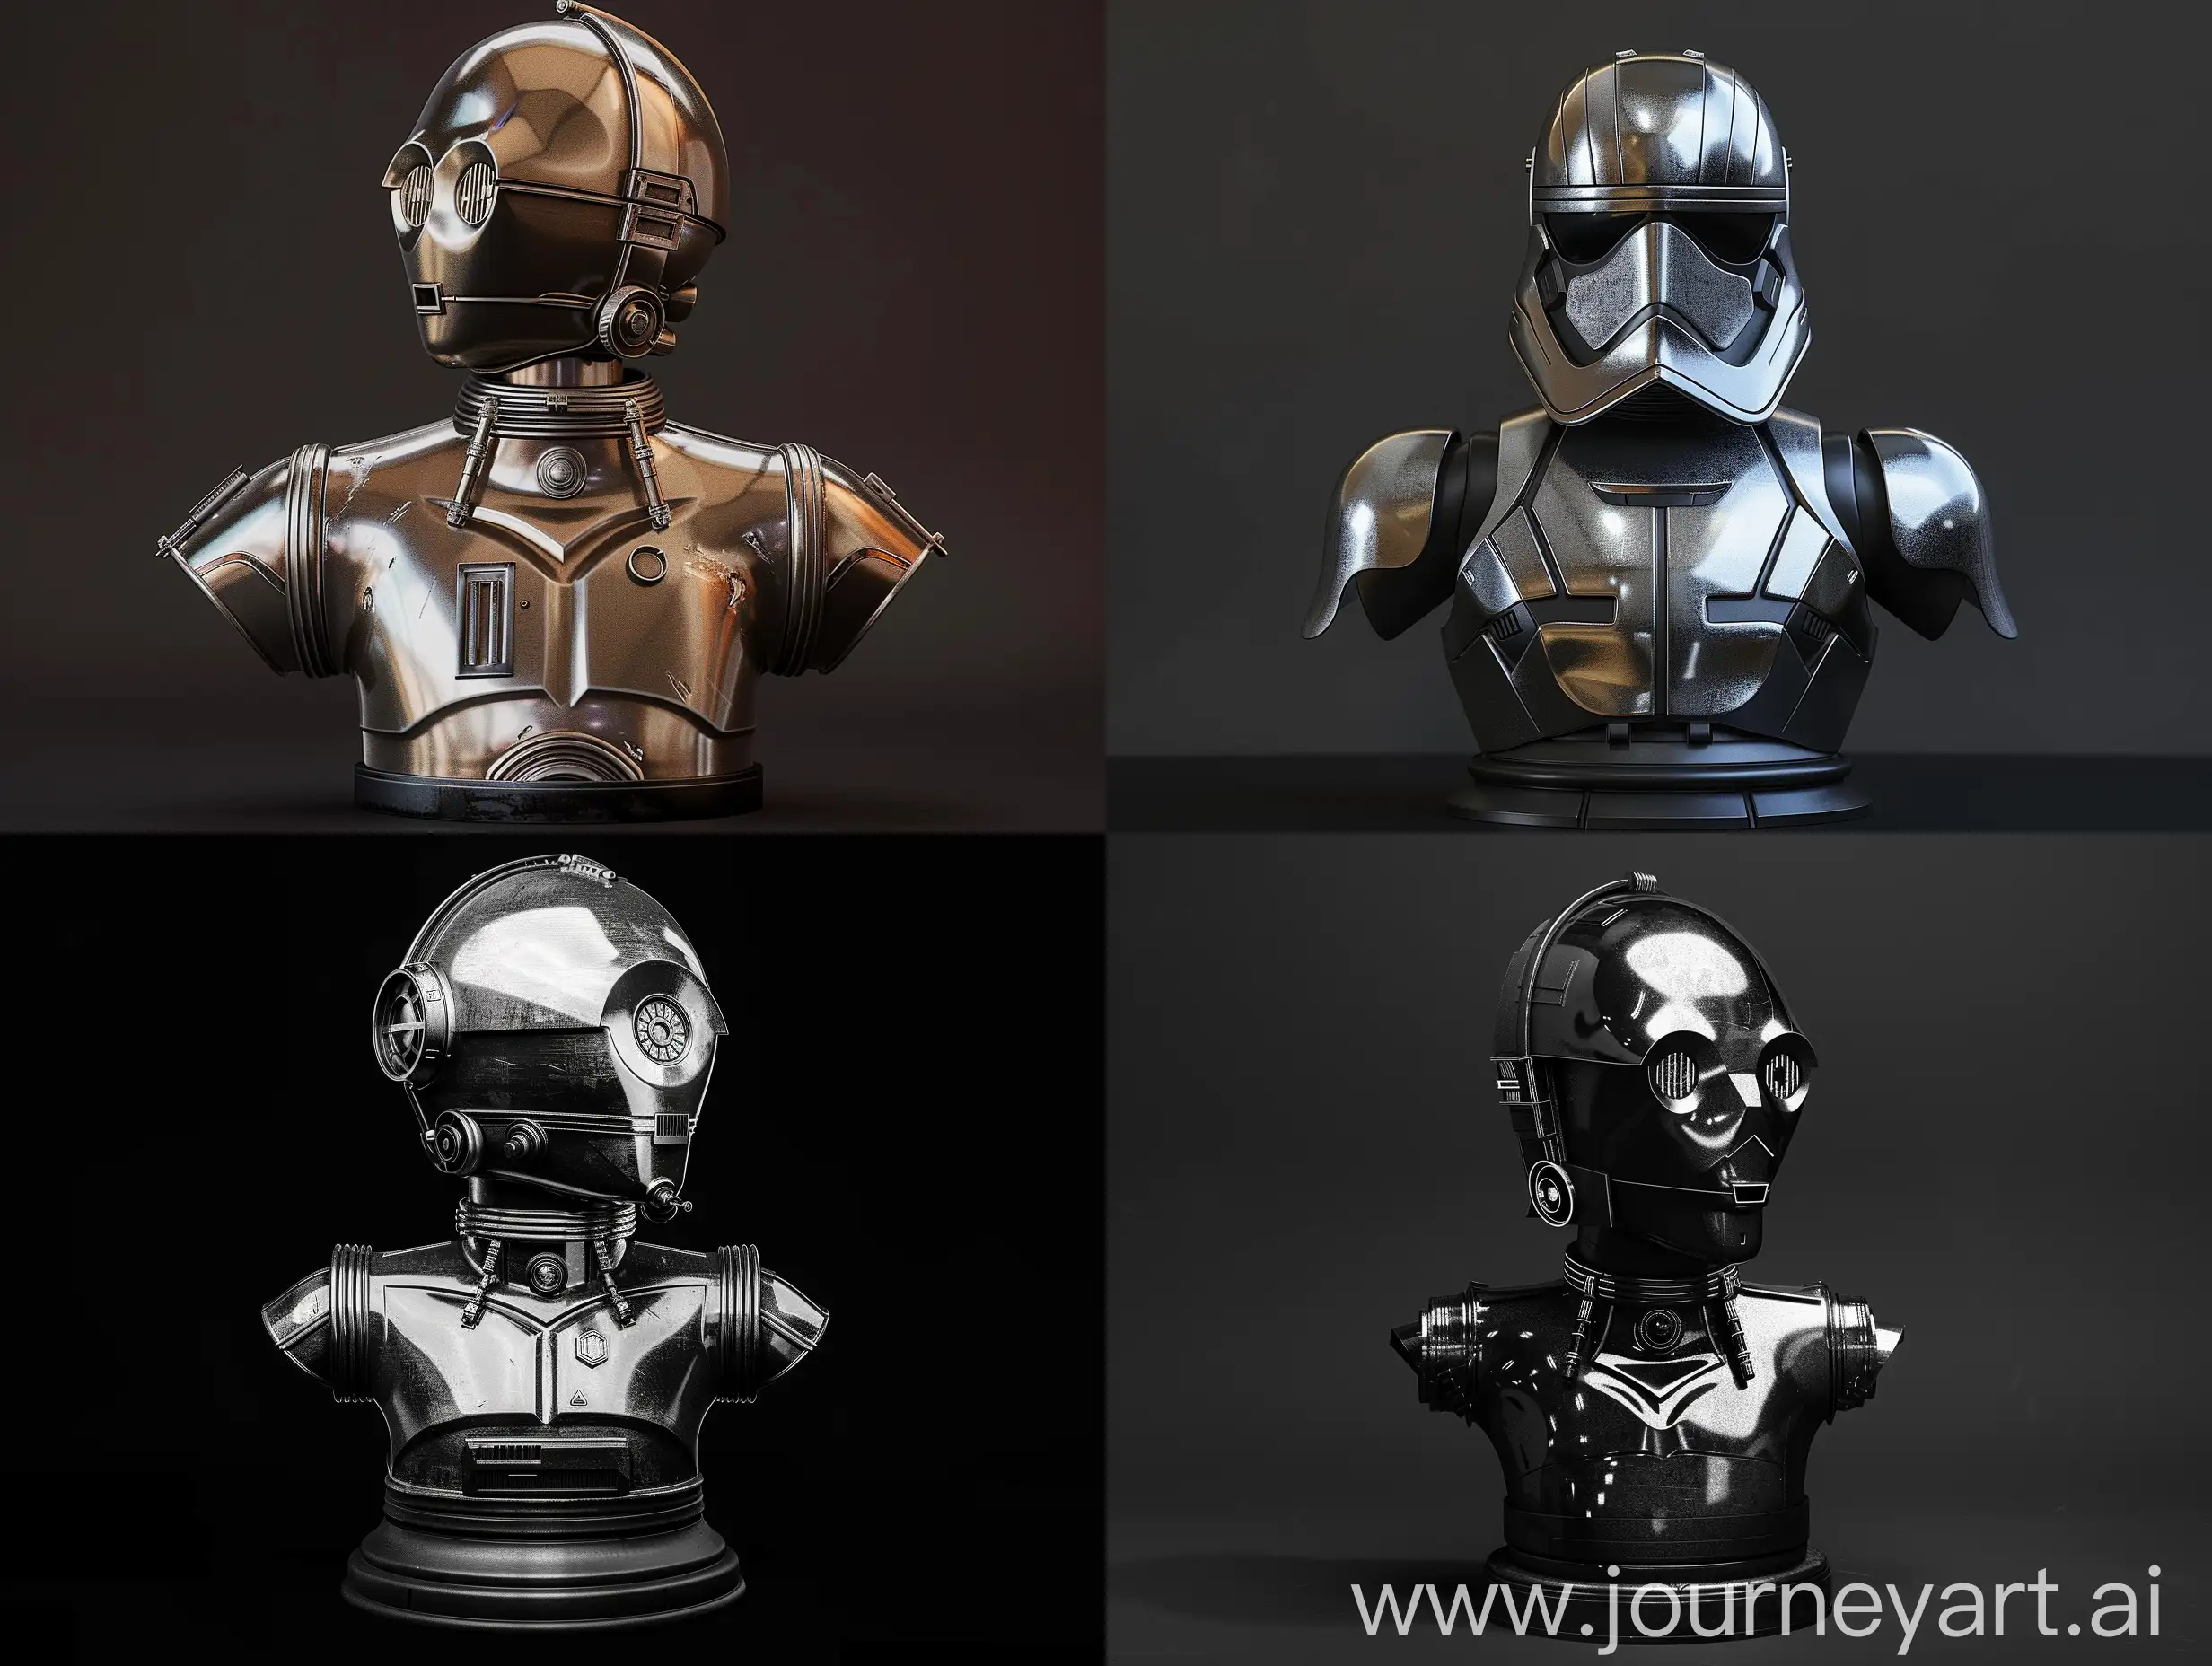 Photorealistic-Metallic-Battle-Droid-Bust-from-Star-Wars-Universe-on-Black-Background